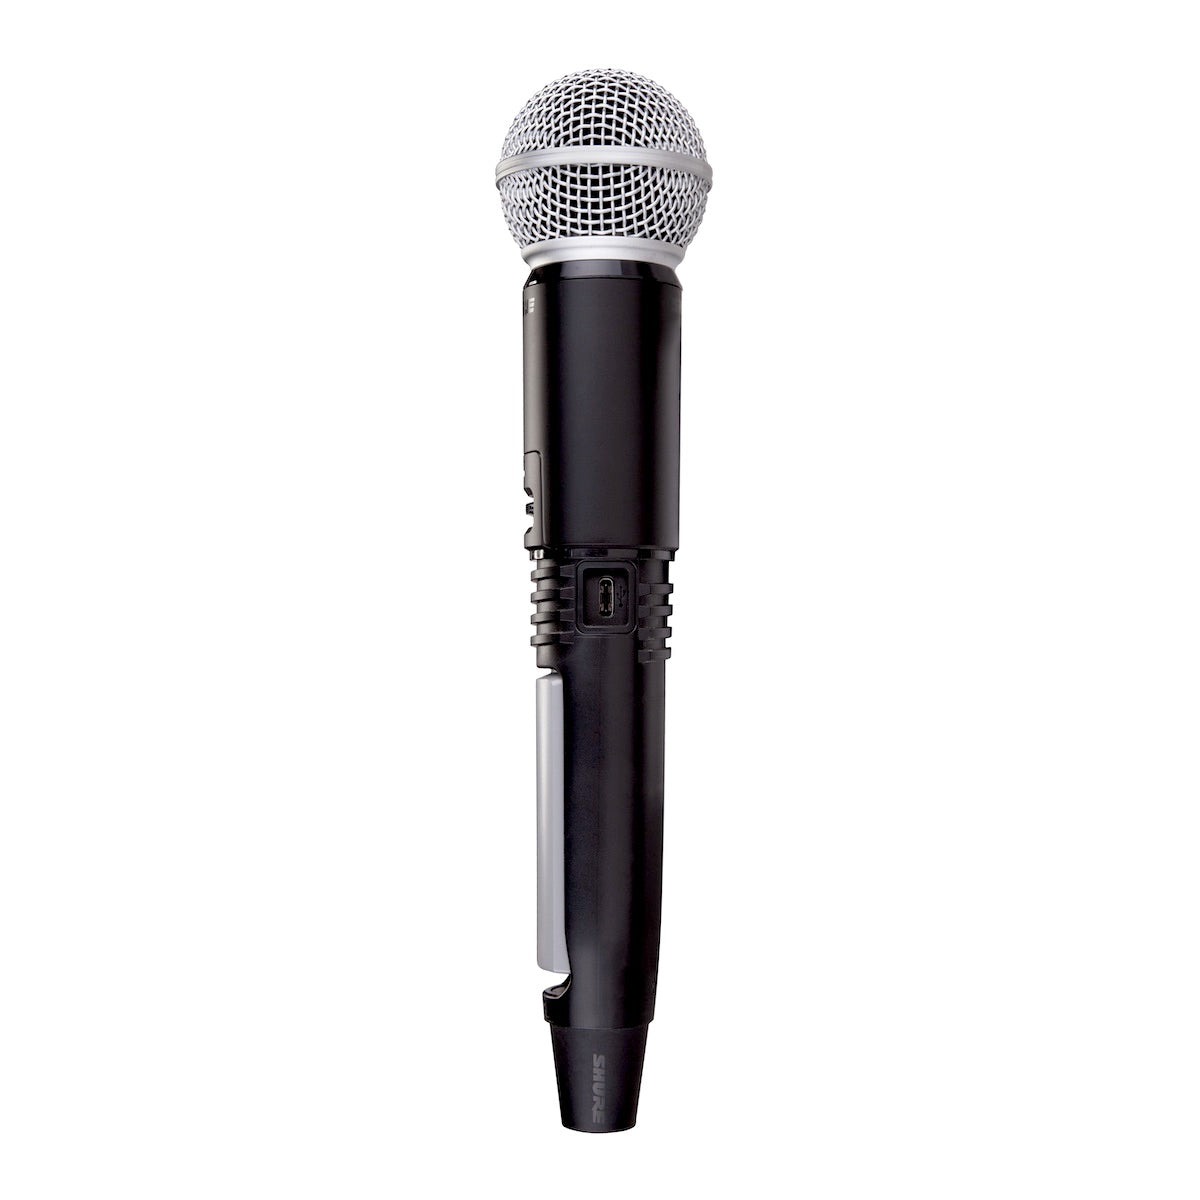 Shure SM58 Handheld Transmitter with battery door removed and USB-C port exposed